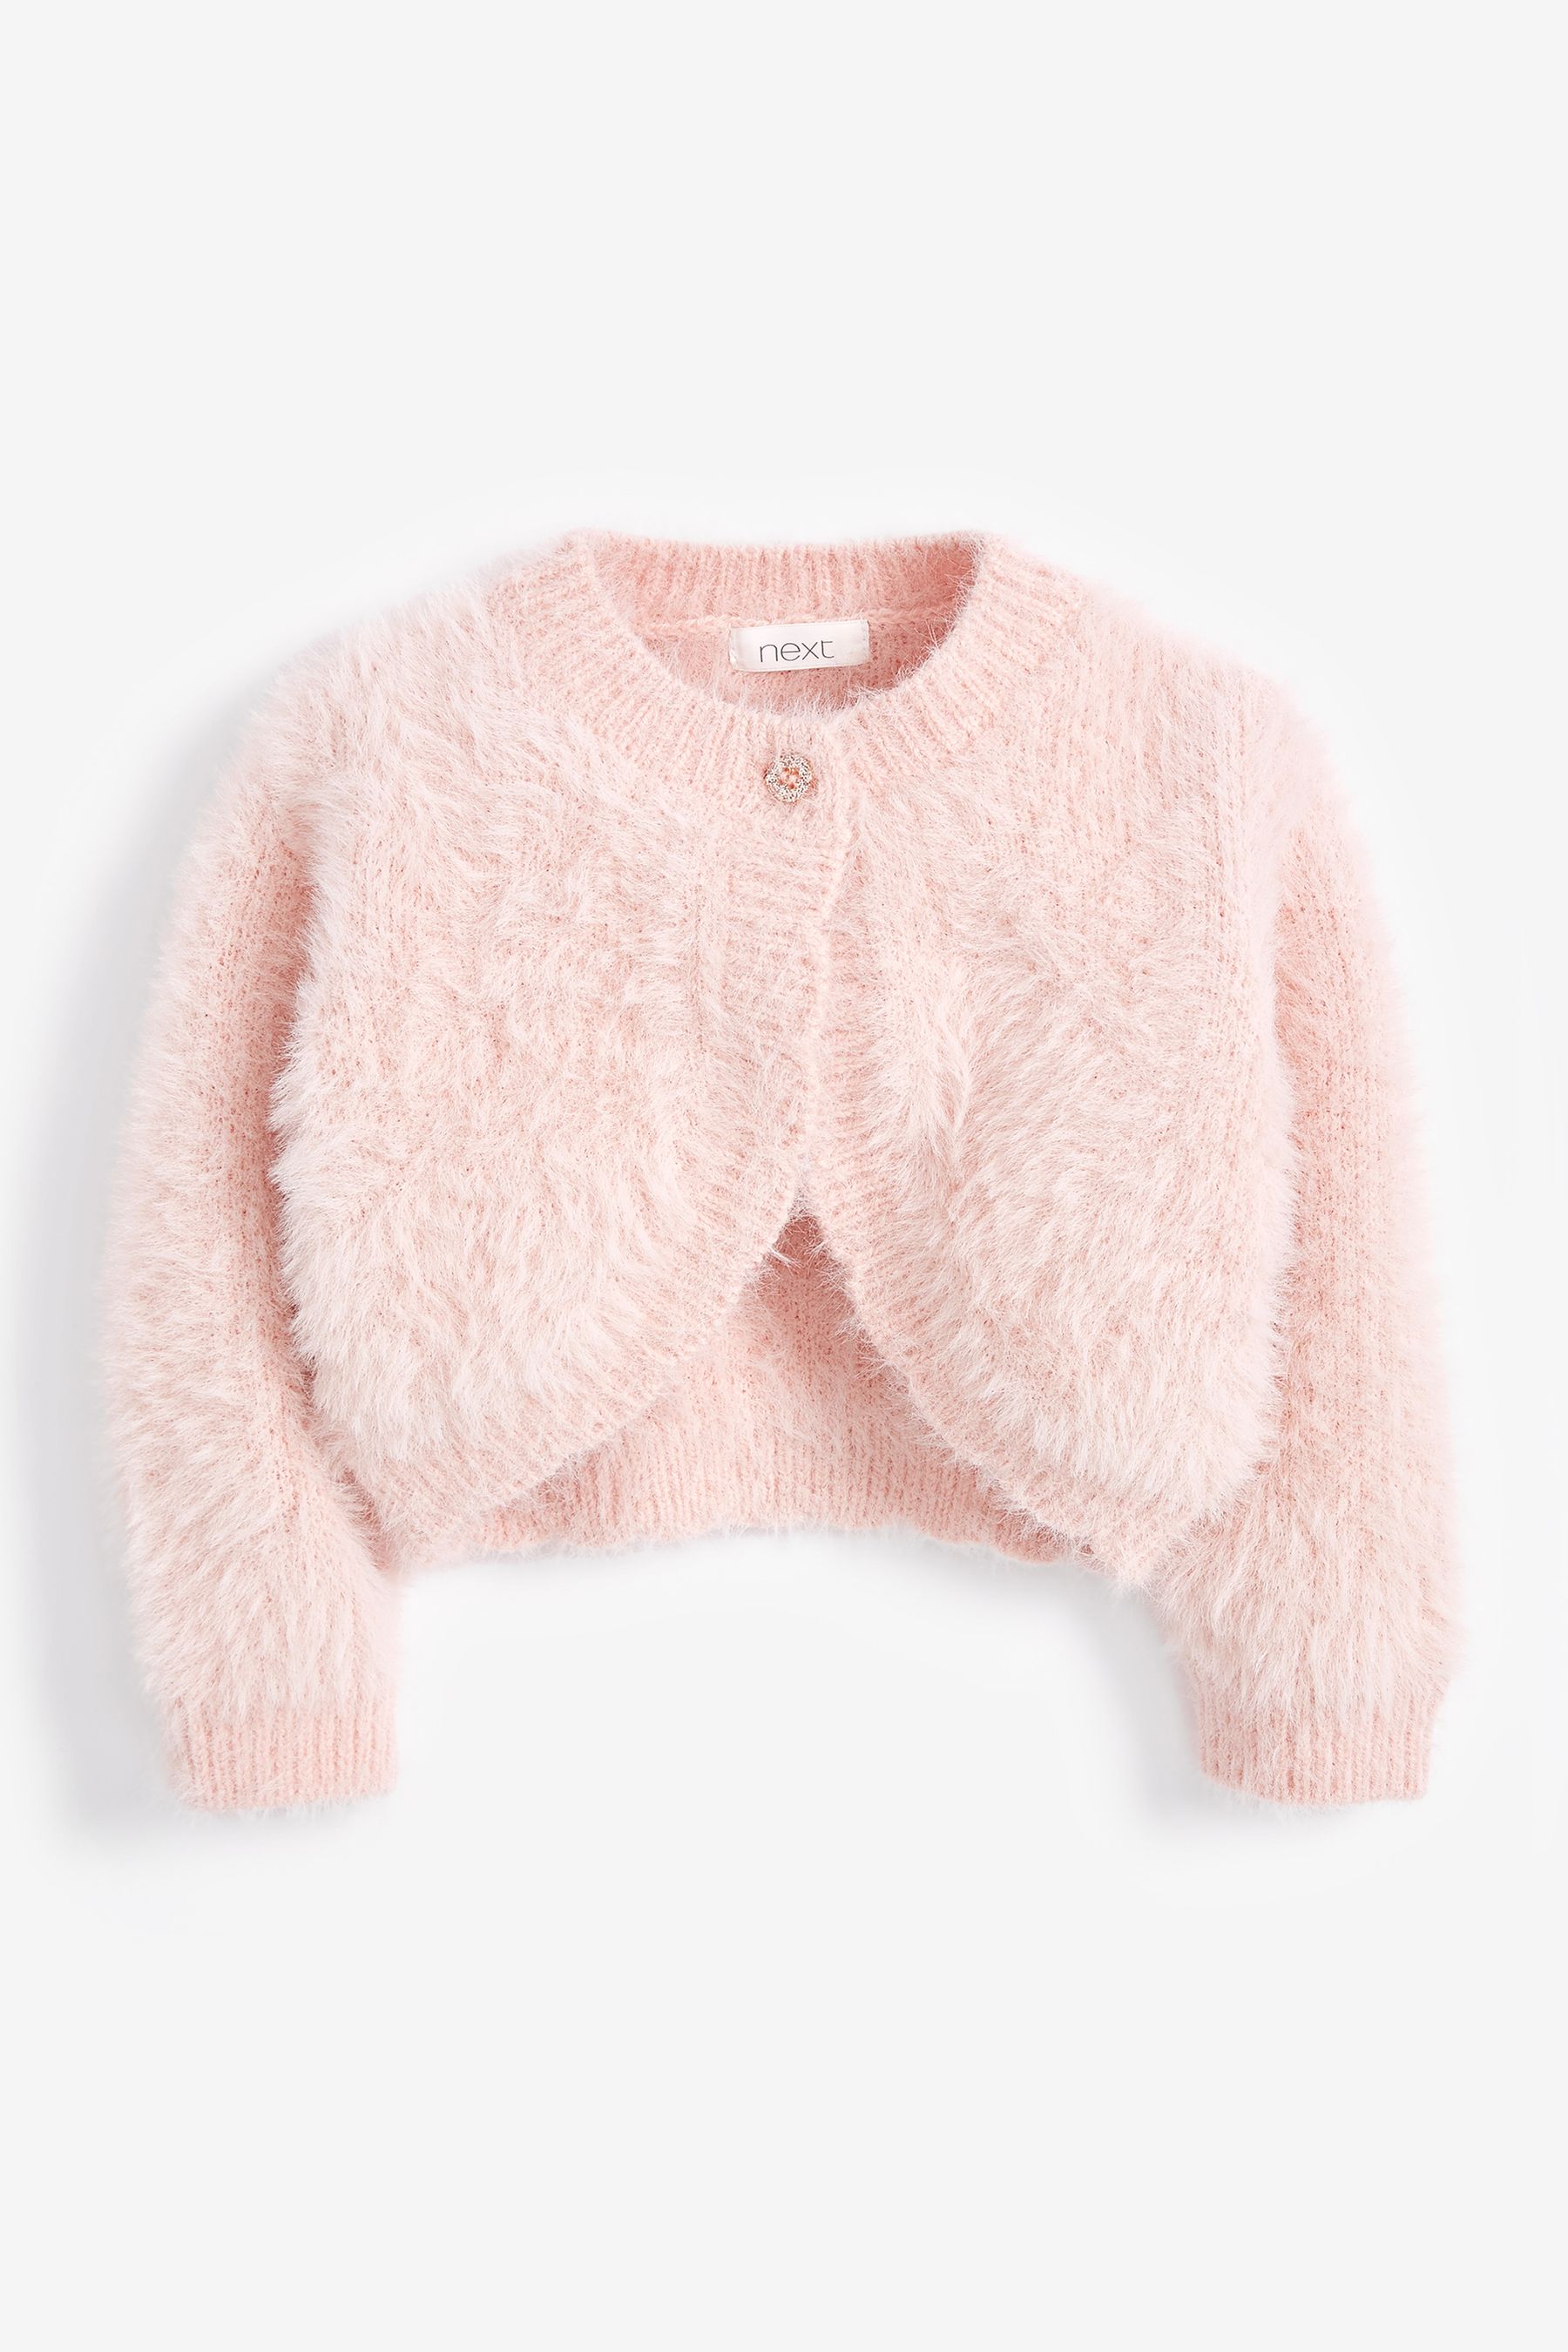 Buy Pink Fluffy Shrug Cardigan (12mths-16yrs) from the Next UK online shop